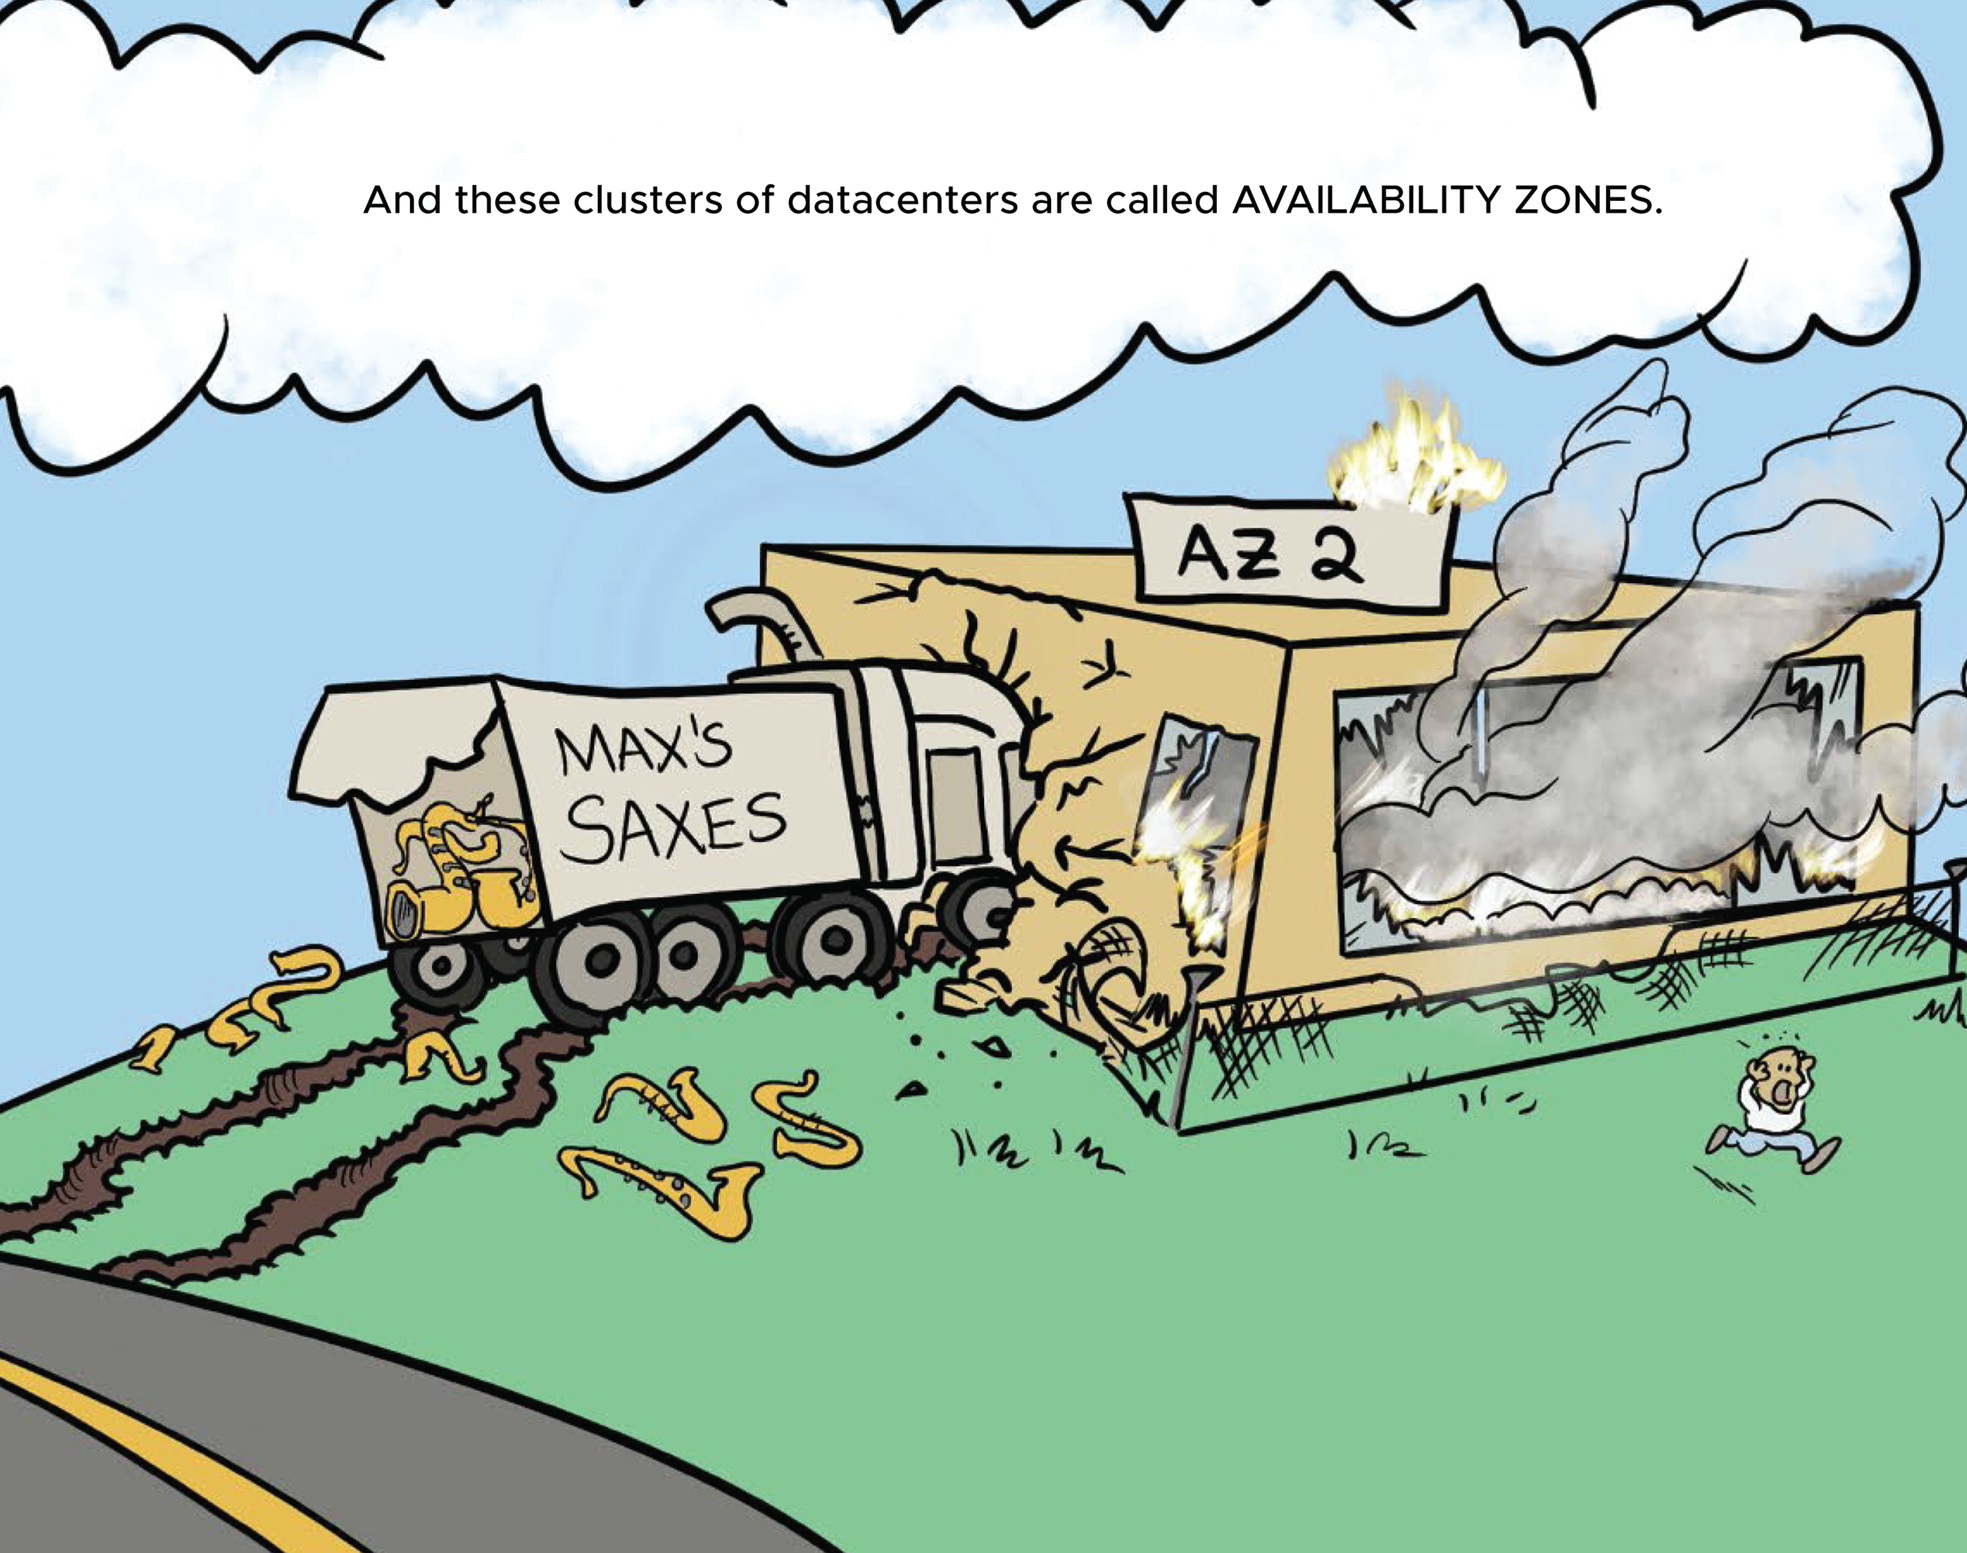 Cartoon illustration of a datacenter AZ2 that is being destroyed.